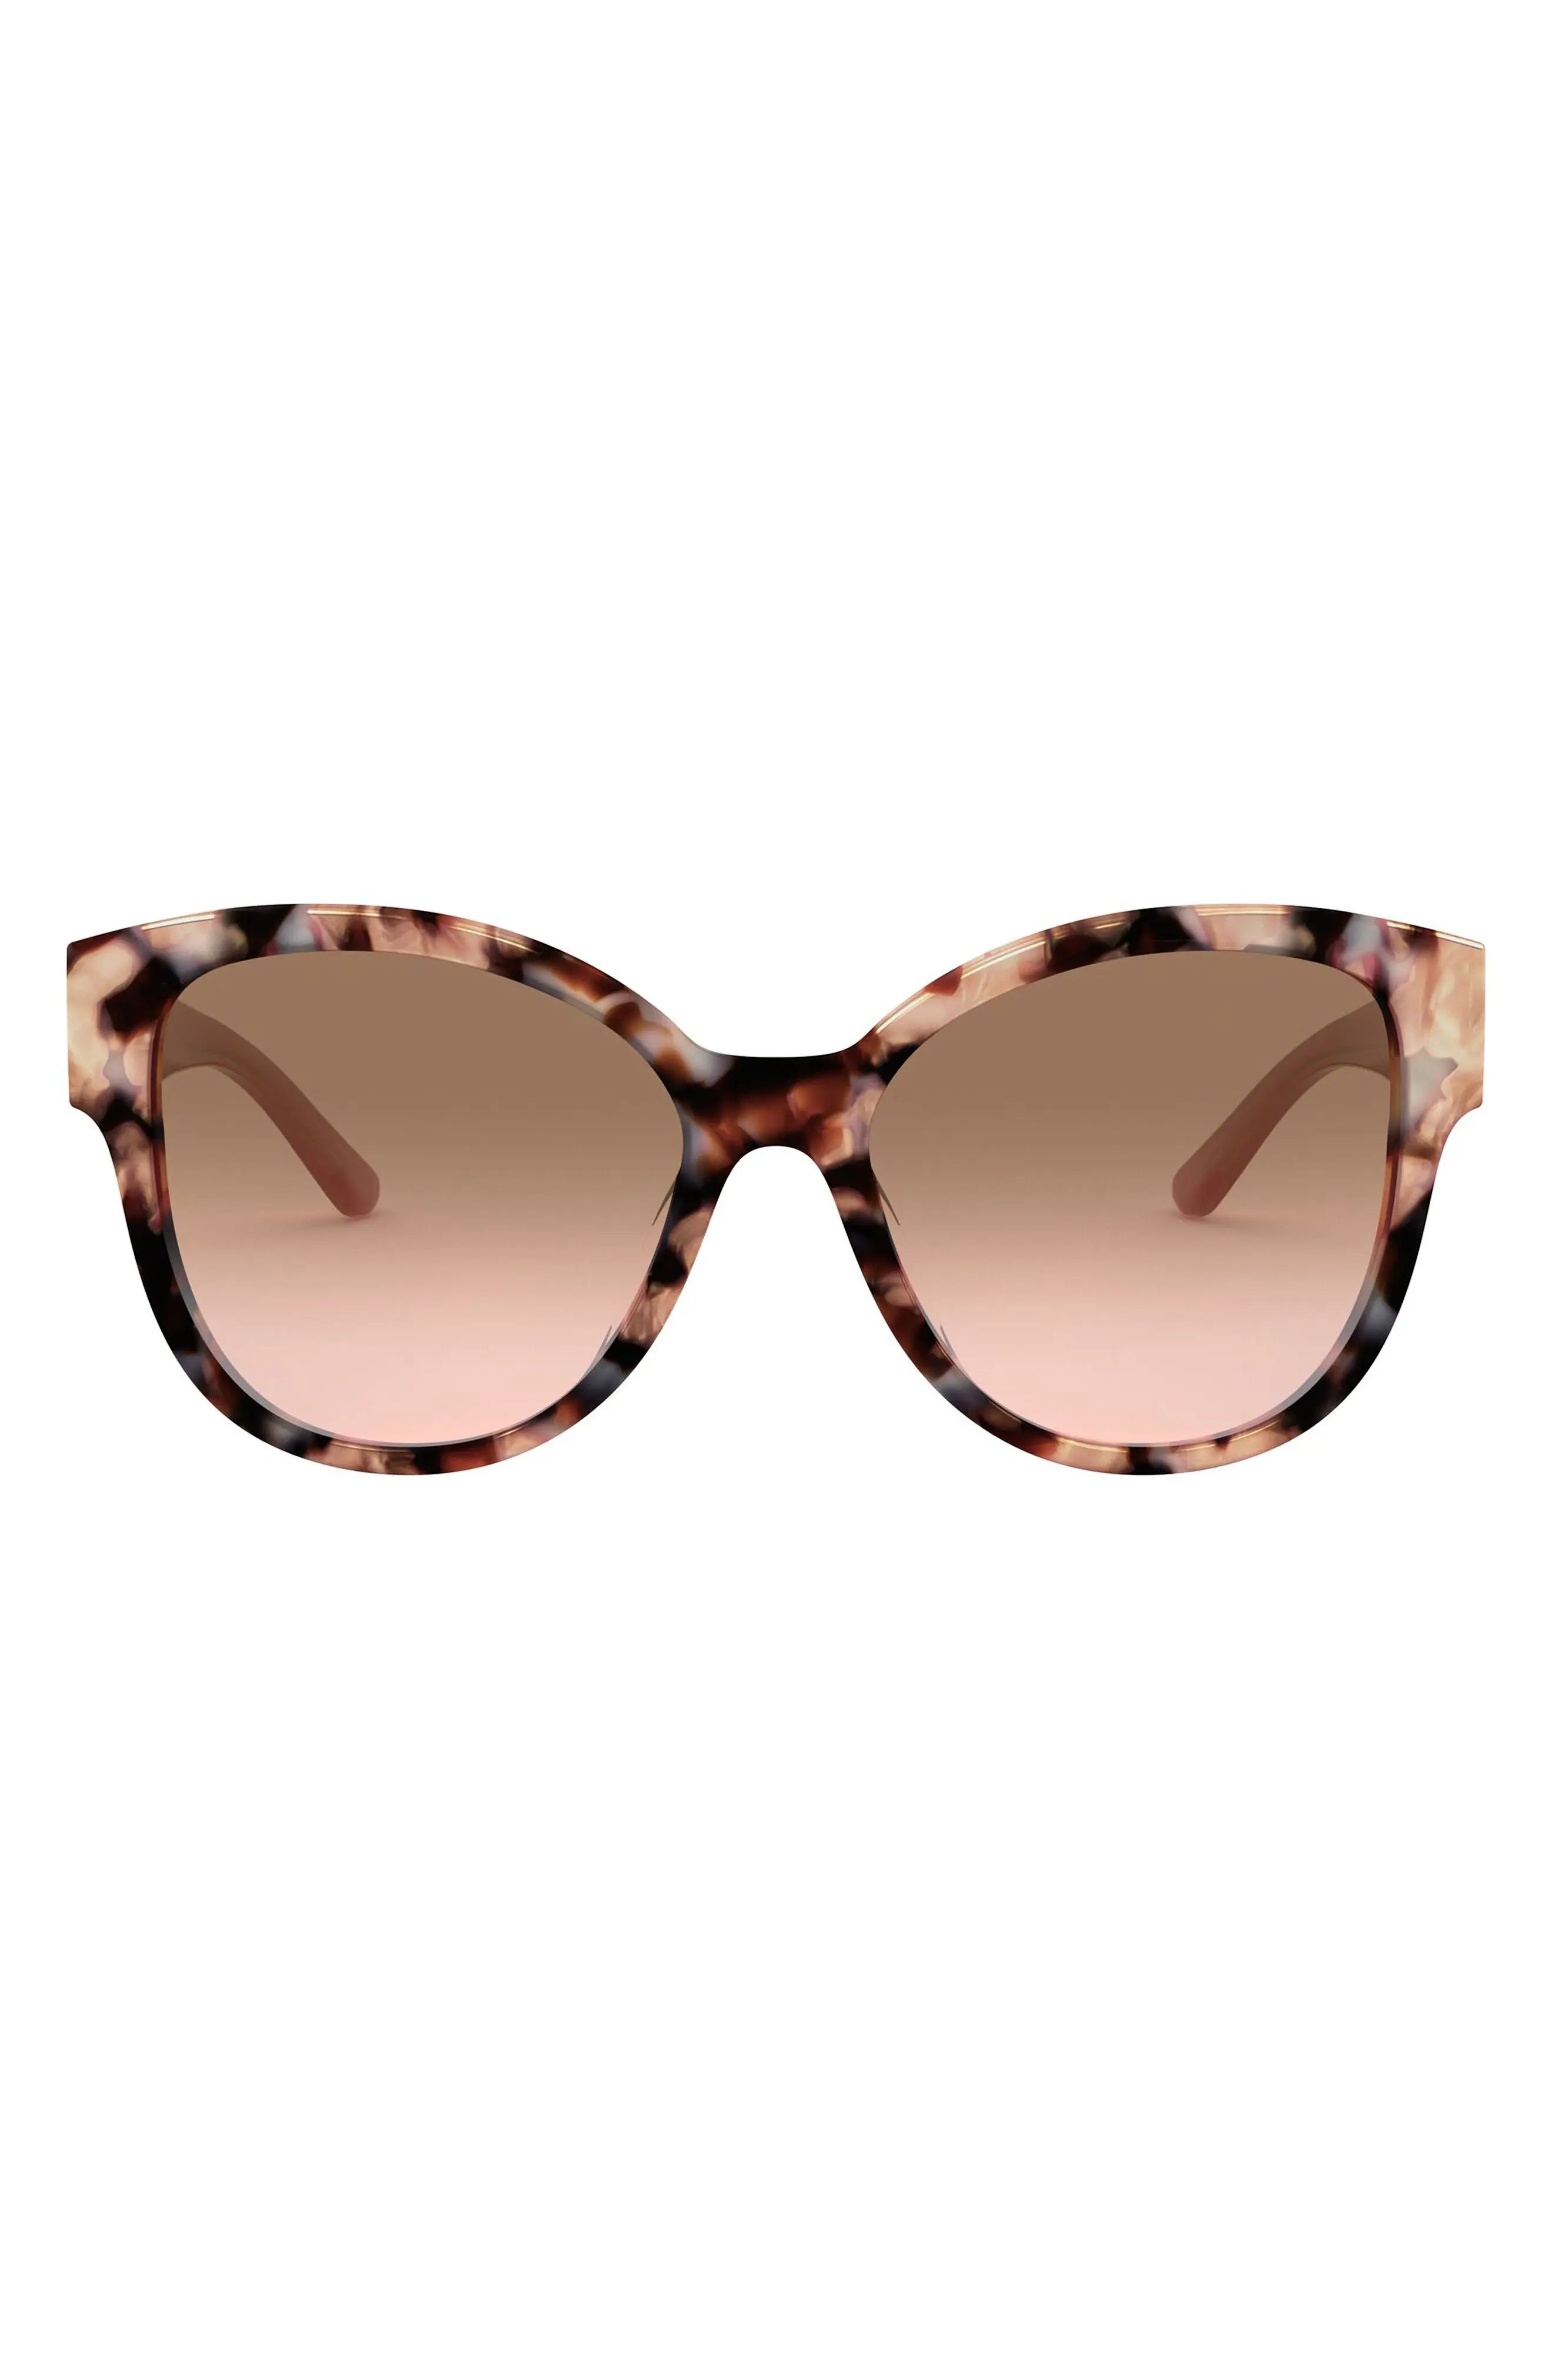 Tory Burch 56mm Gradient Cat Eye Sunglasses in Pink at Nordstrom | Nordstrom